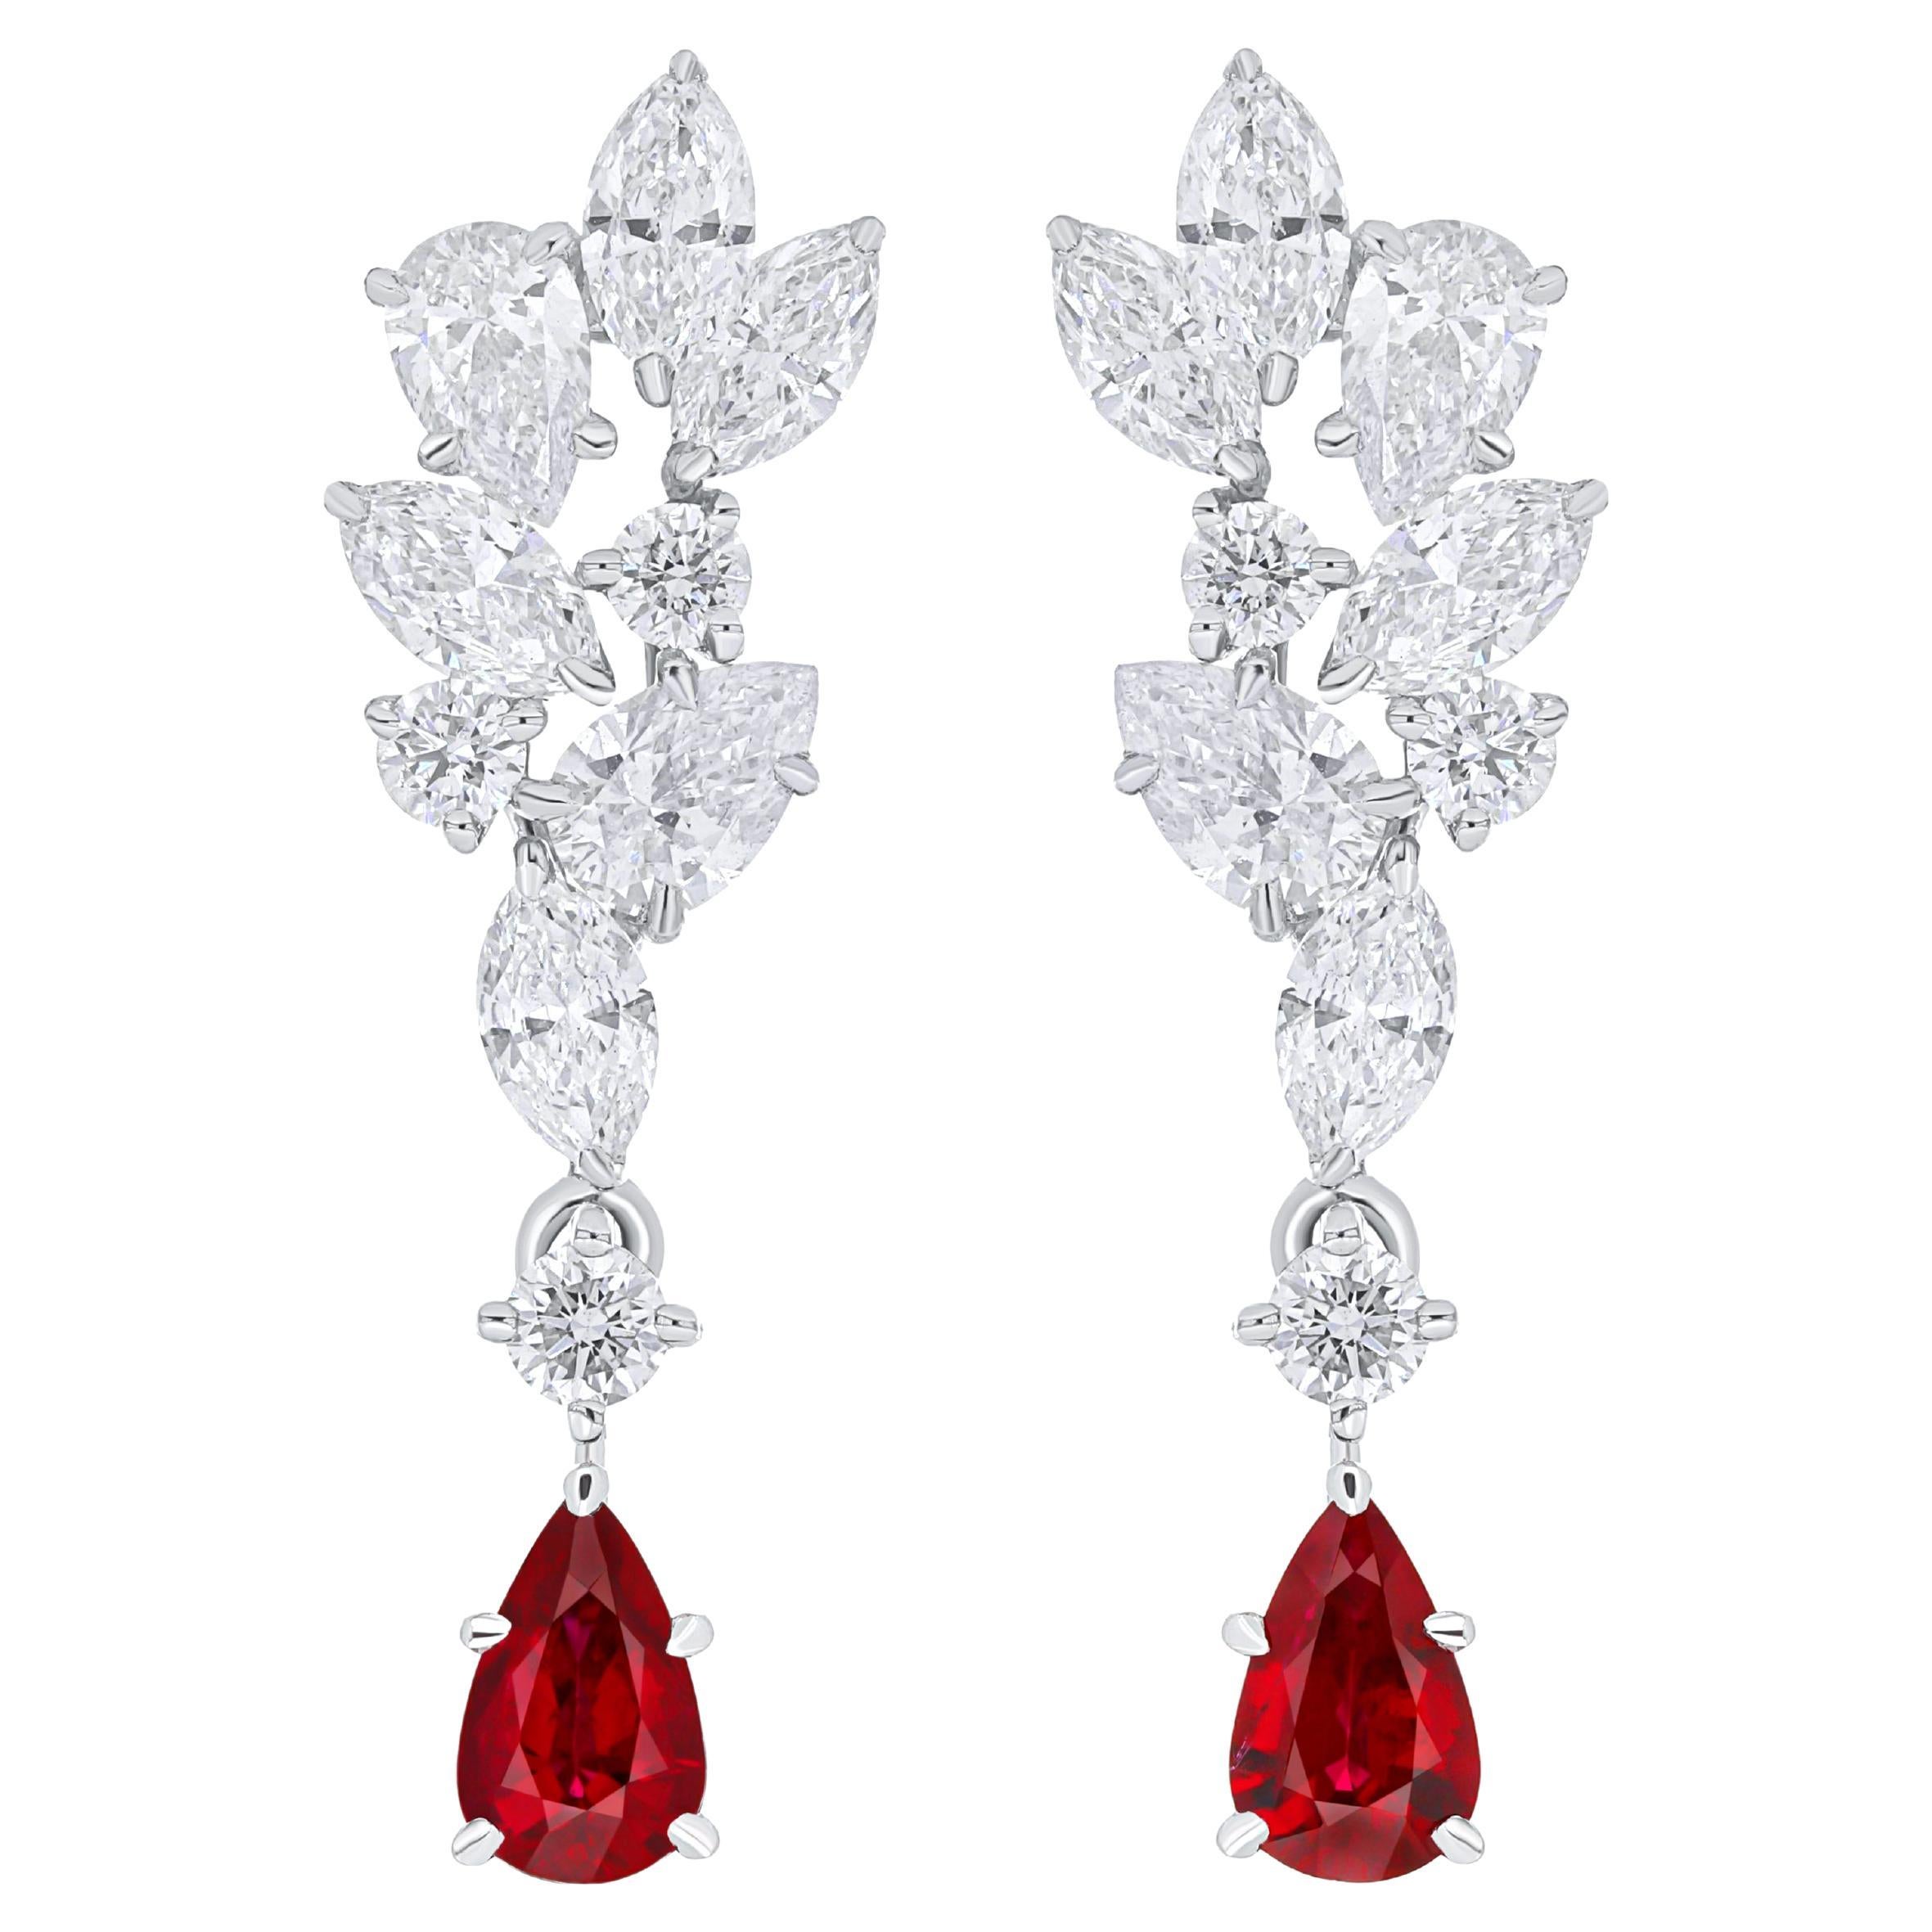 Mozambique Ruby and Diamond Studded Earrings in 18 Karat White Gold